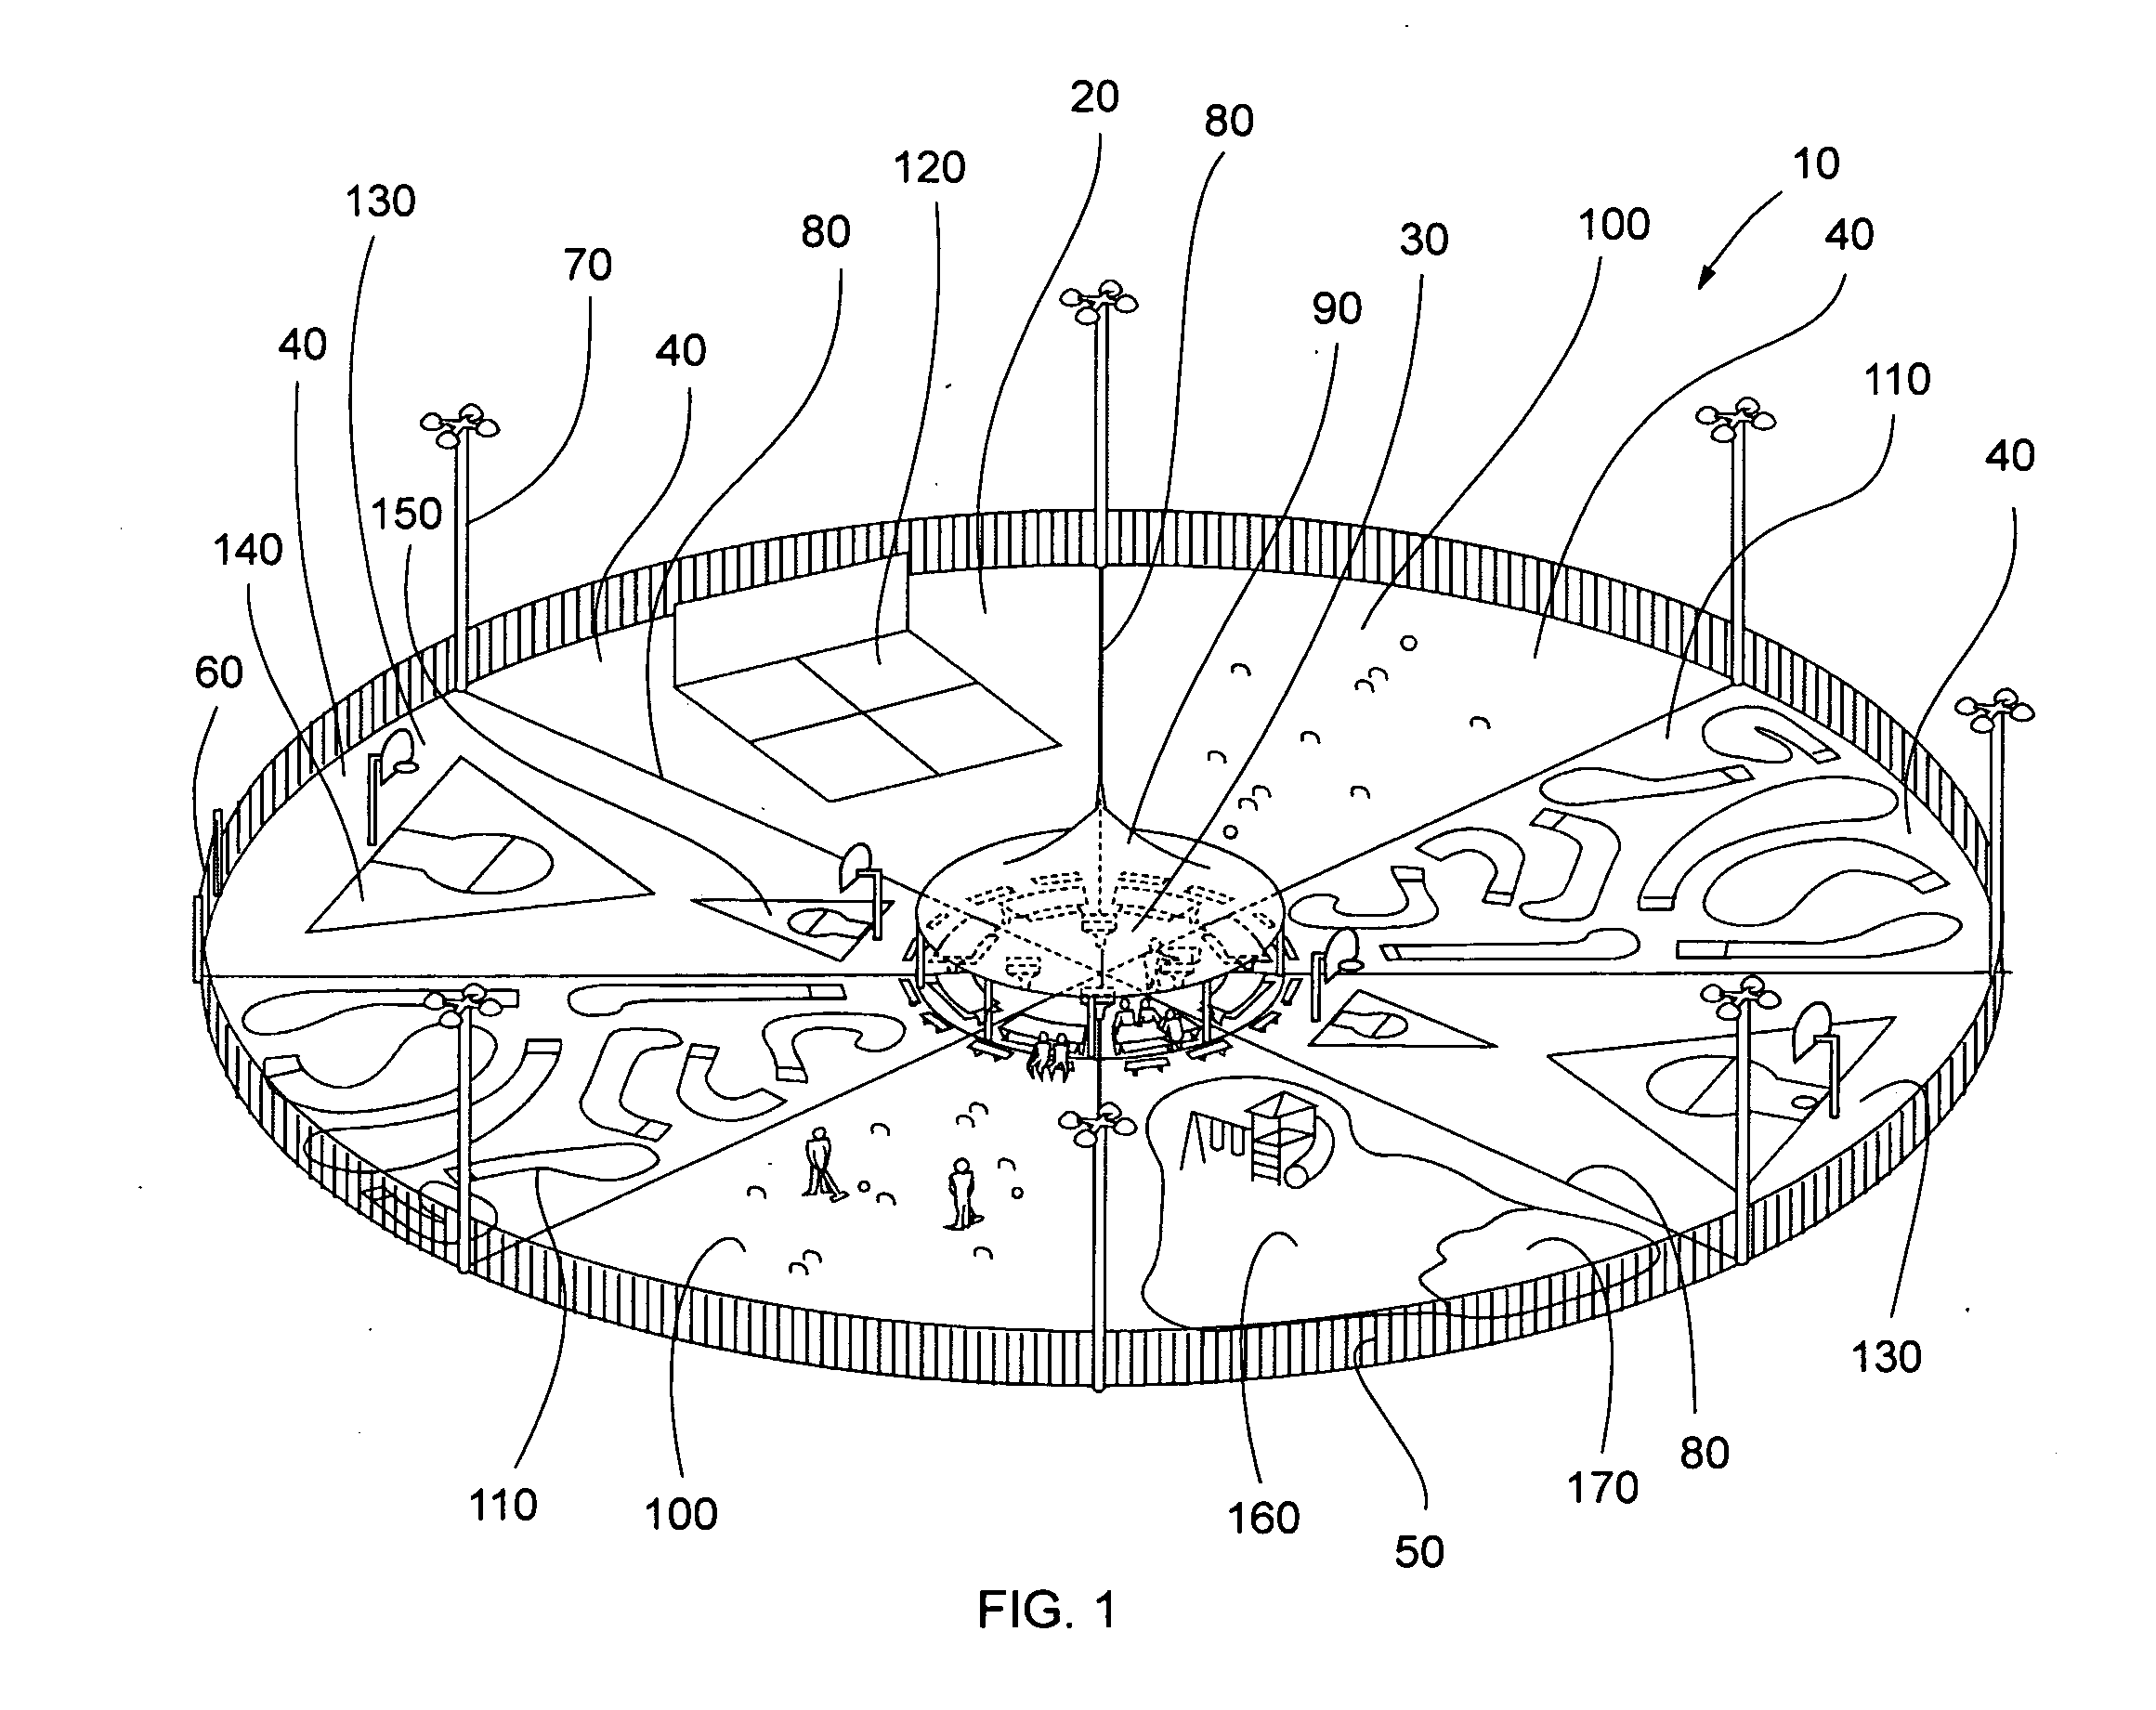 Segmented observable activity enclosure and method of use